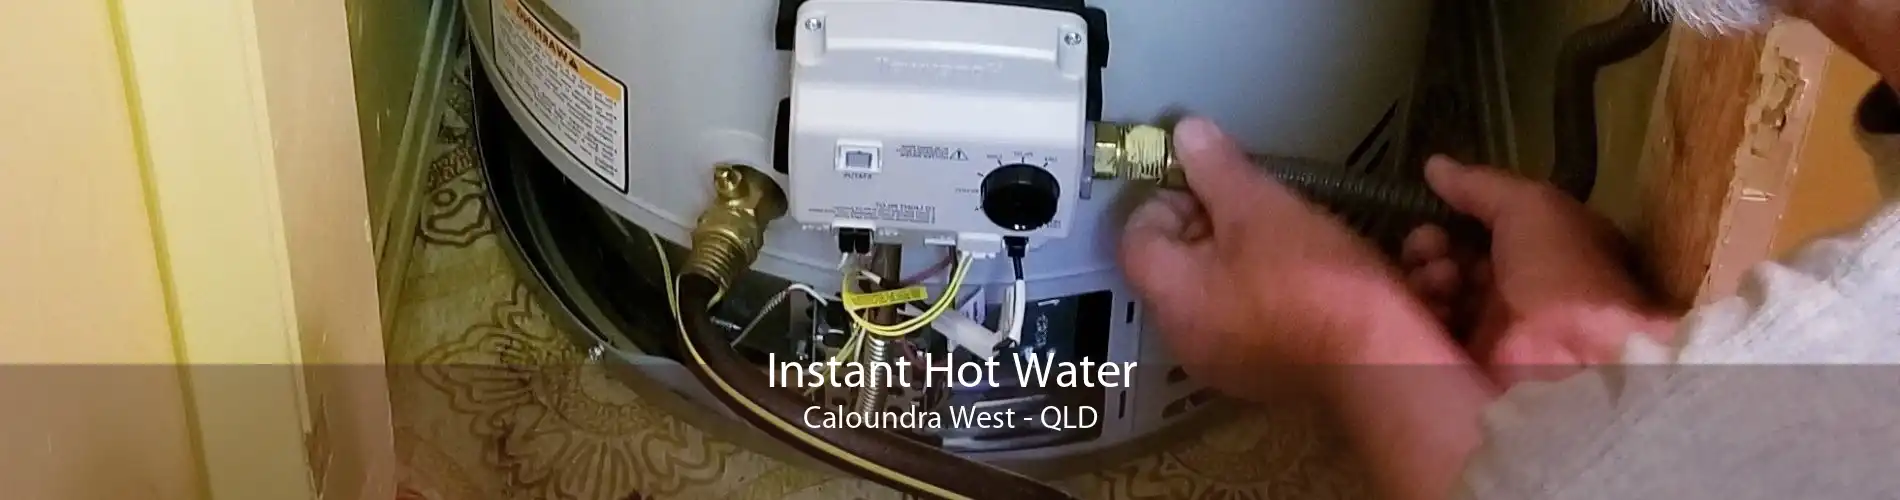 Instant Hot Water Caloundra West - QLD